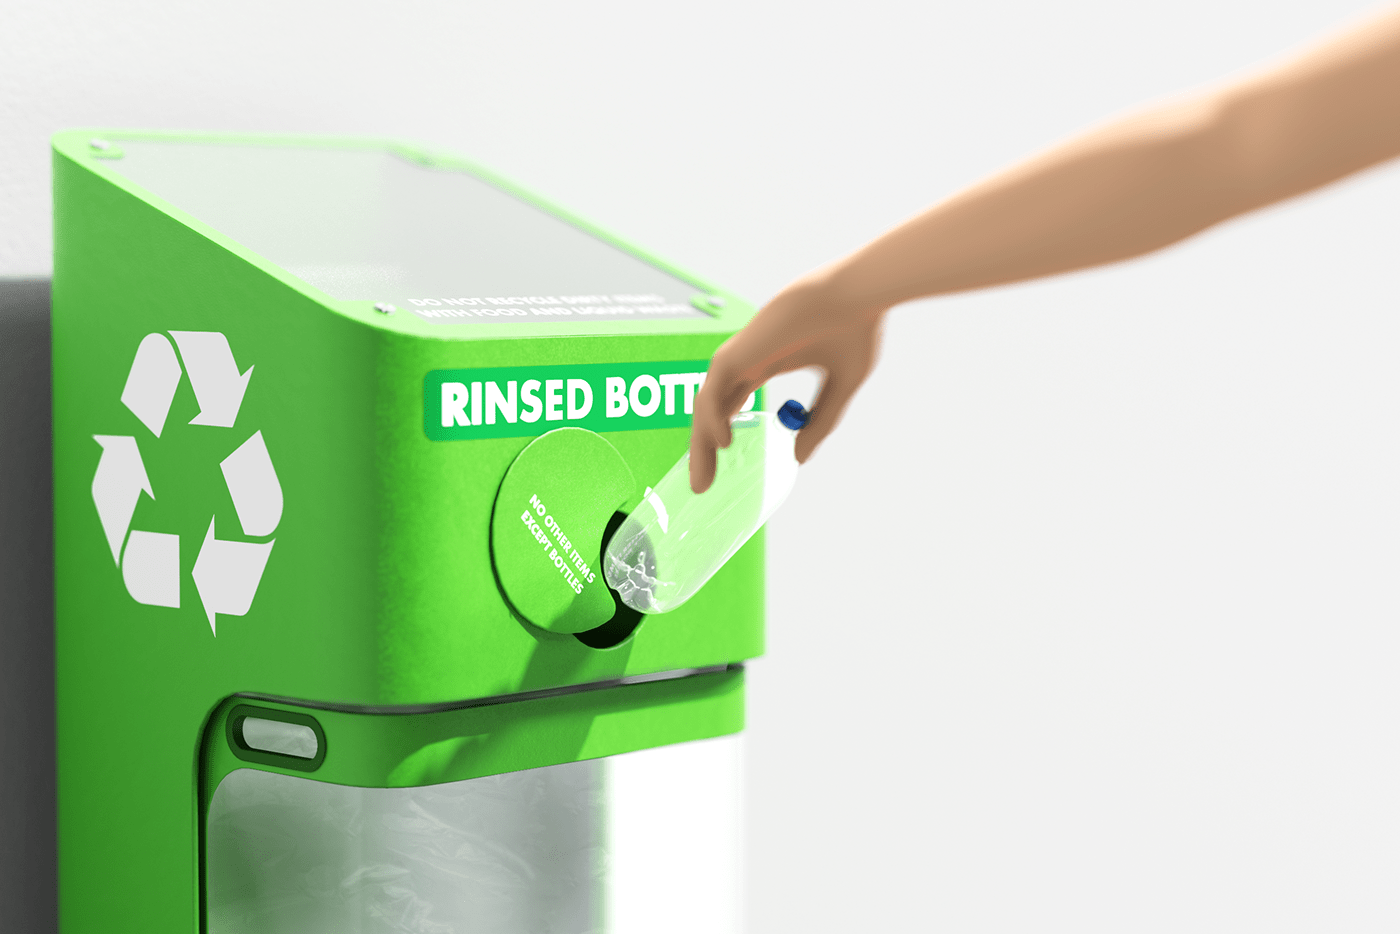 Environment design green industrial design  product design  public design Sustainability public space recycling recycling bin